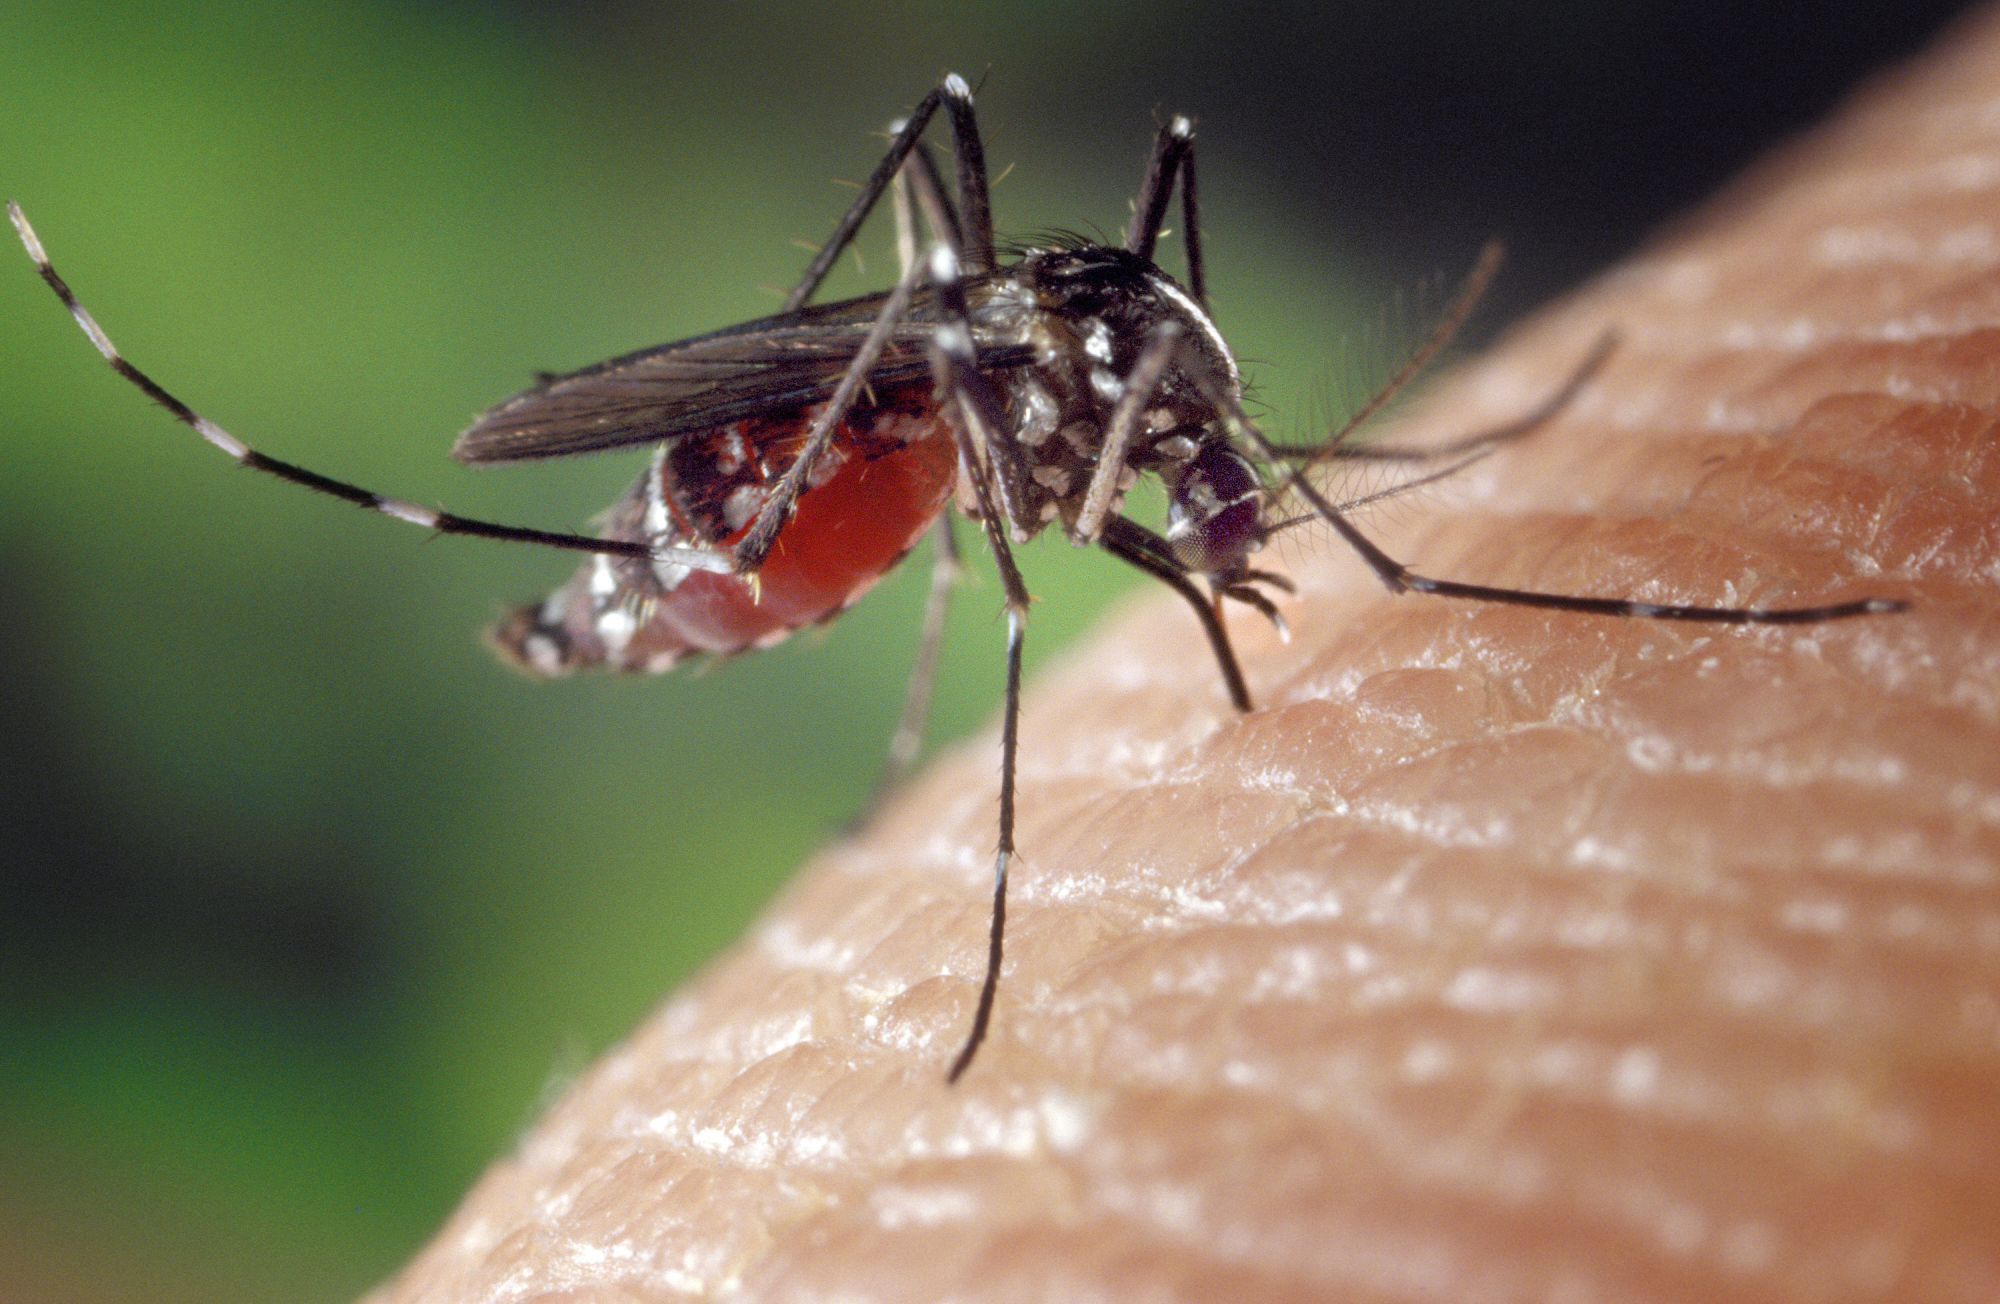 The aedes albopictus, or Asian tiger mosquito, is responsible for the spread of dengue fever virus. © James Gathany,Centers for Disease Control and Prevention(public domain)